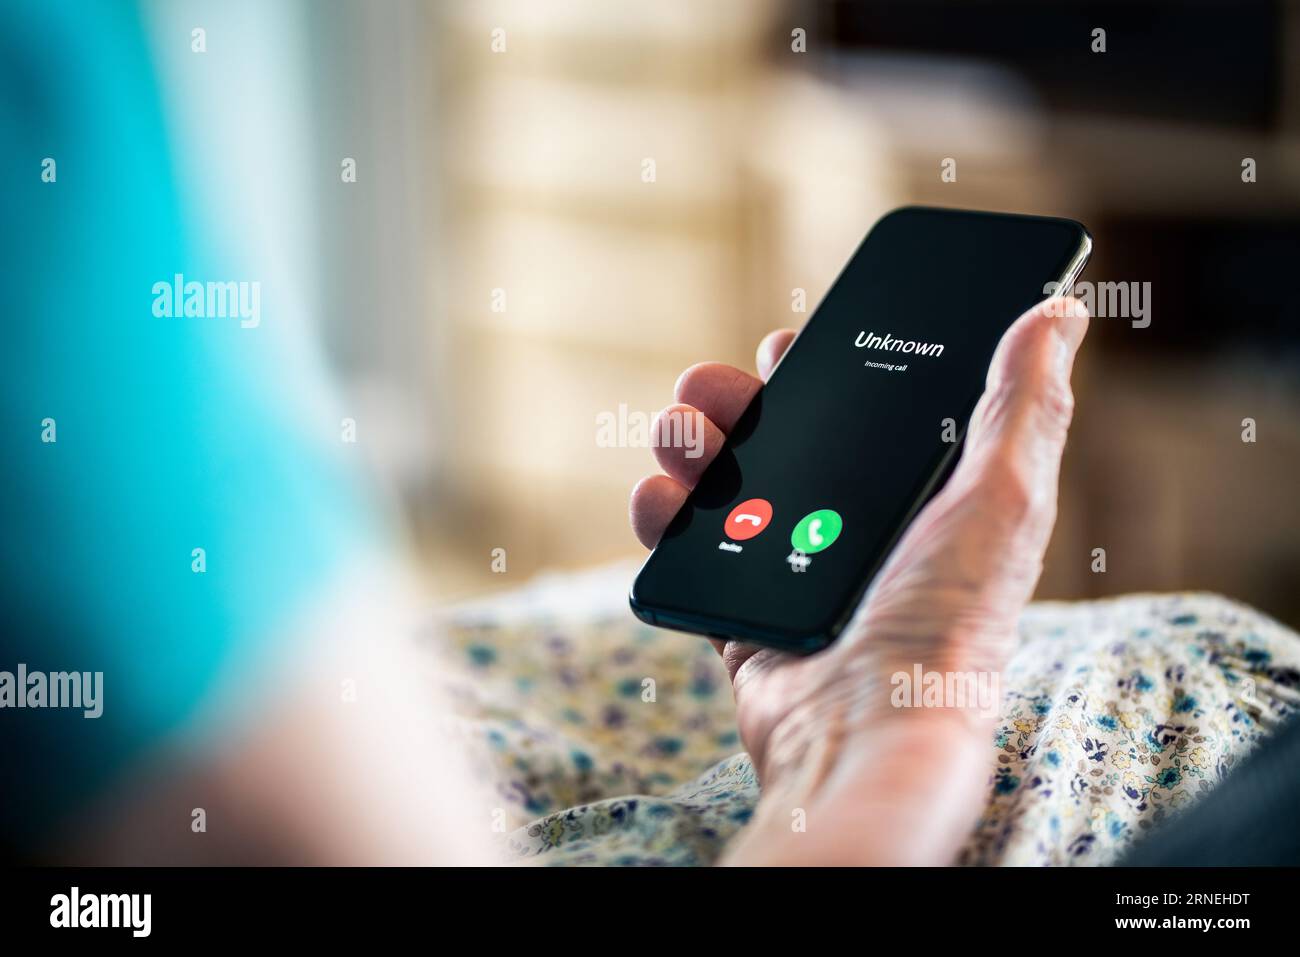 Old woman and phone call with hidden mobile number. Senior mature lady and fraud and scam caller. Love and romance hoax. Holding smartphone in hand. Stock Photo